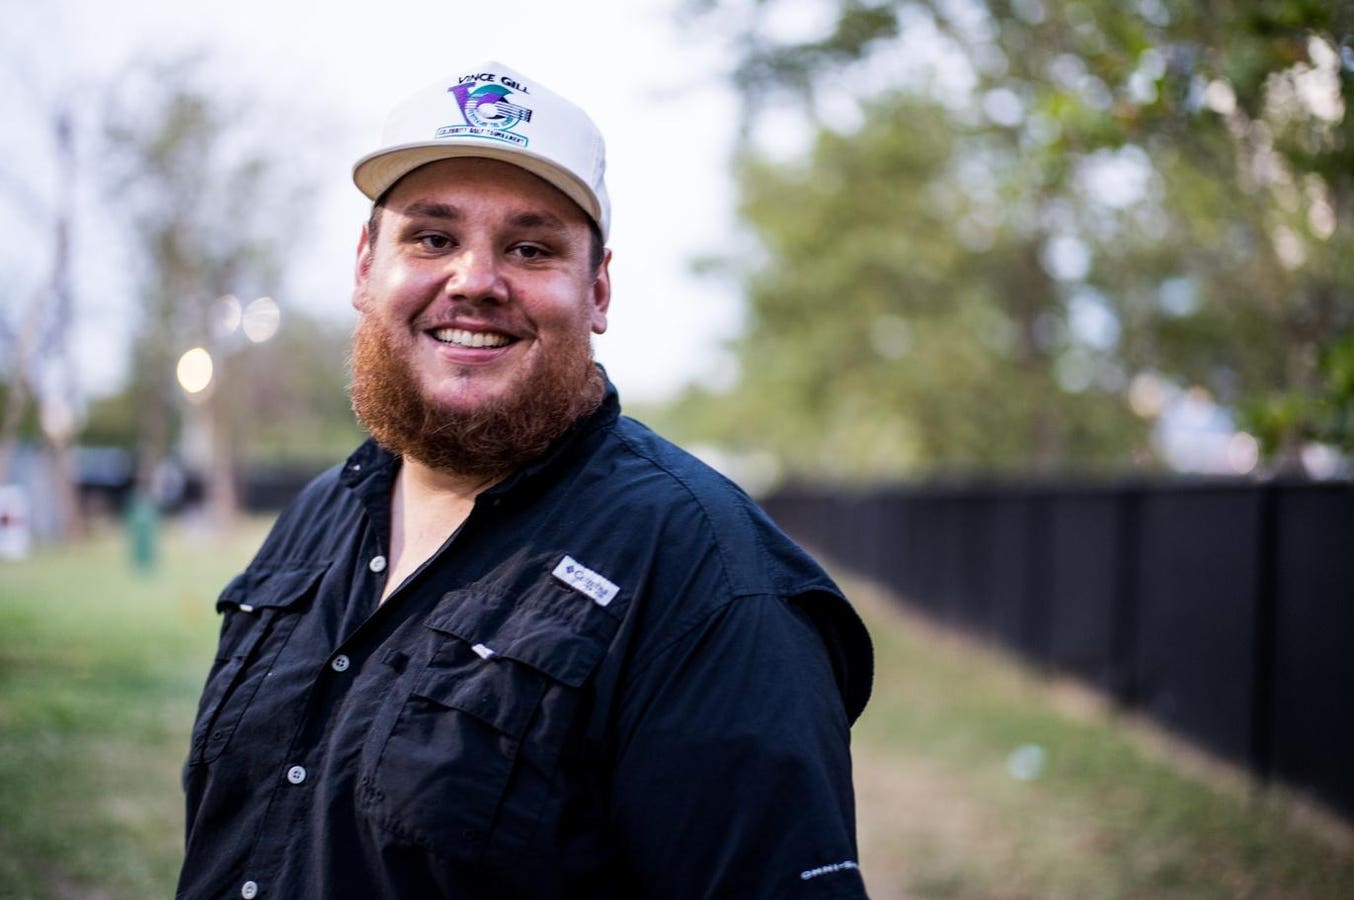 The ‘Twisters’ Movie Soundtrack Is Off To A Strong Start Thanks To Luke Combs